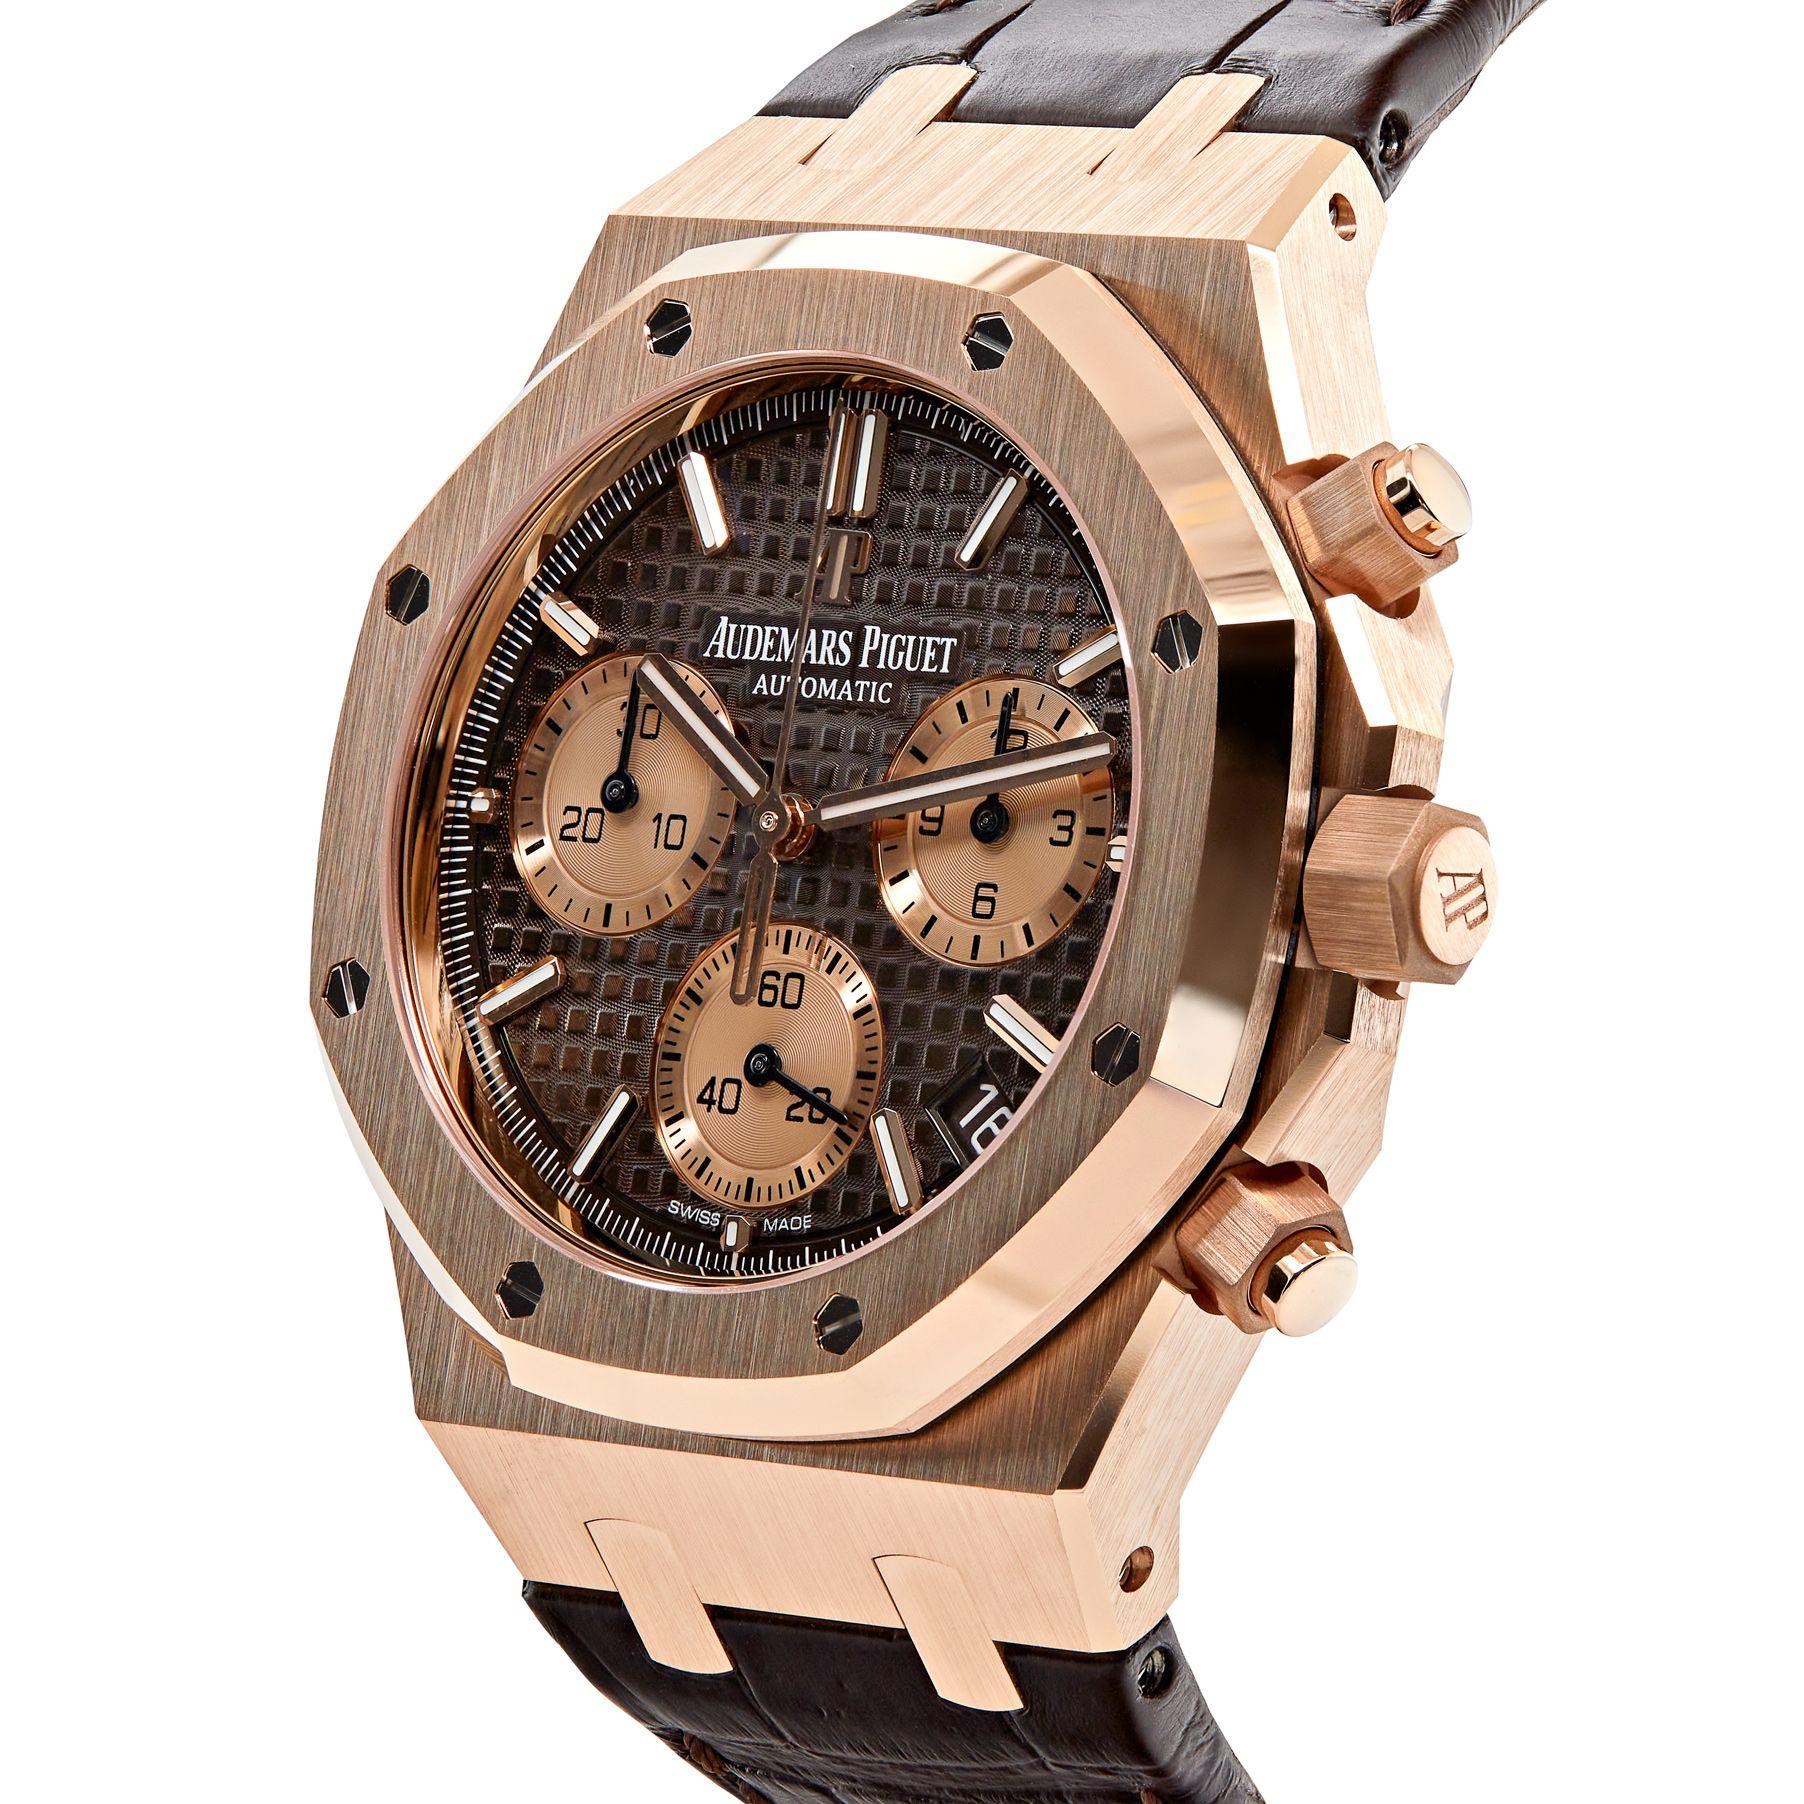 This Royal Oak Selfwinding Chronograph adorns a brown “Grande Tapisserie” dial with pink gold-toned counters, pink gold applied hour-markers and Royal Oak hands with luminescent coating. This model features a 41mm 18-carat pink gold case,